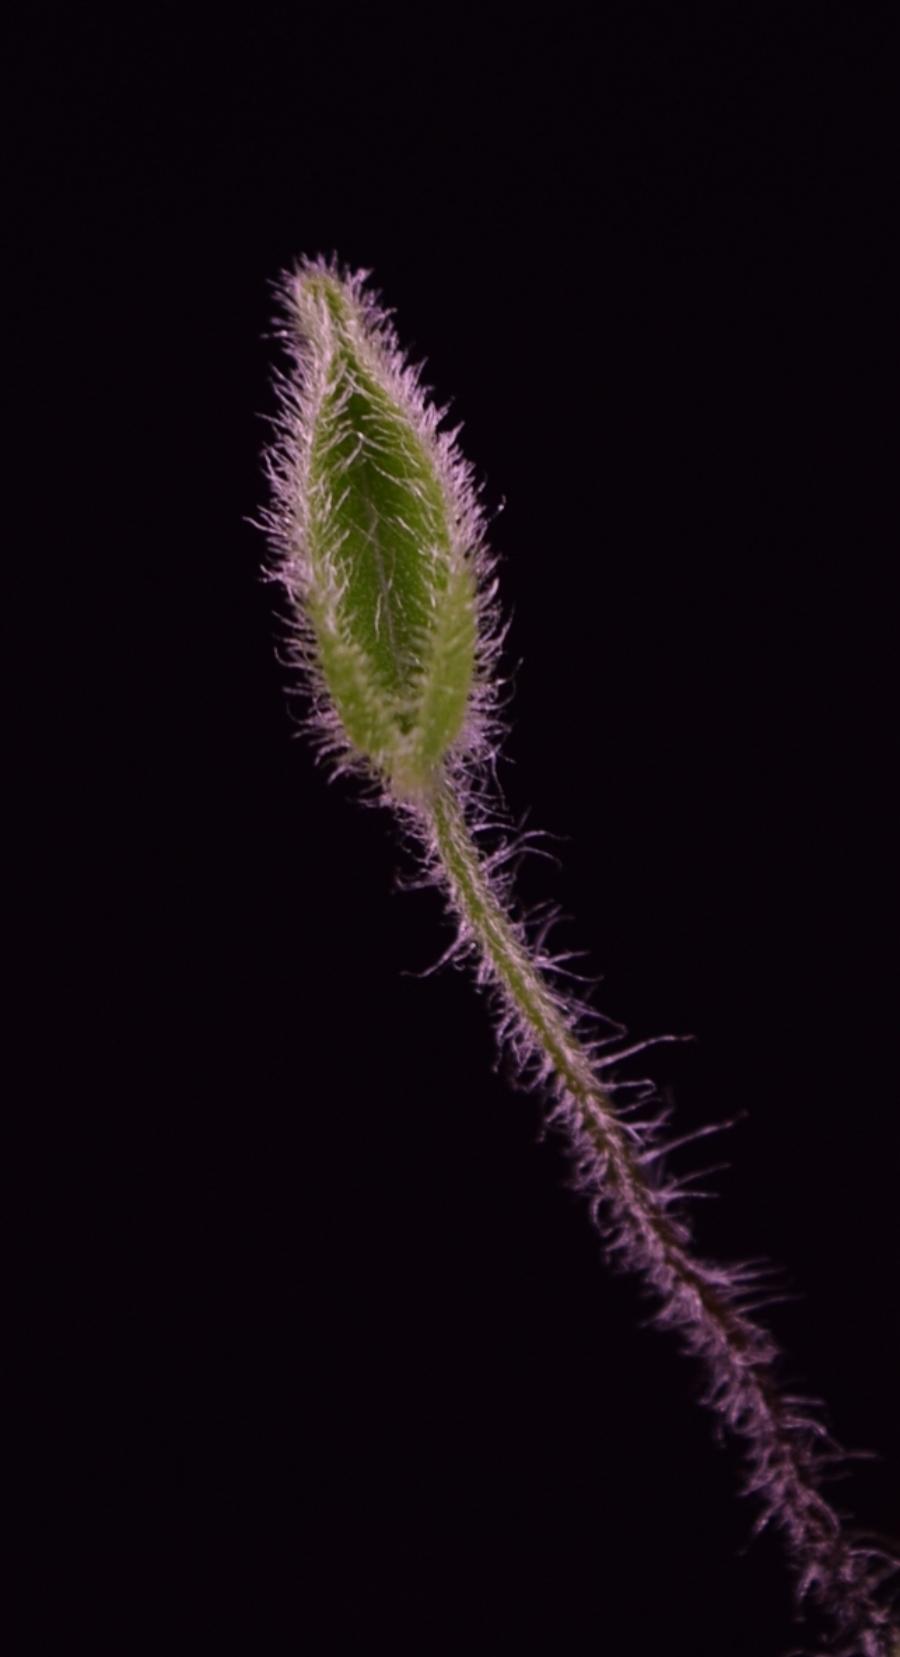 Newly formed Heart Fern frond lined with hairs.